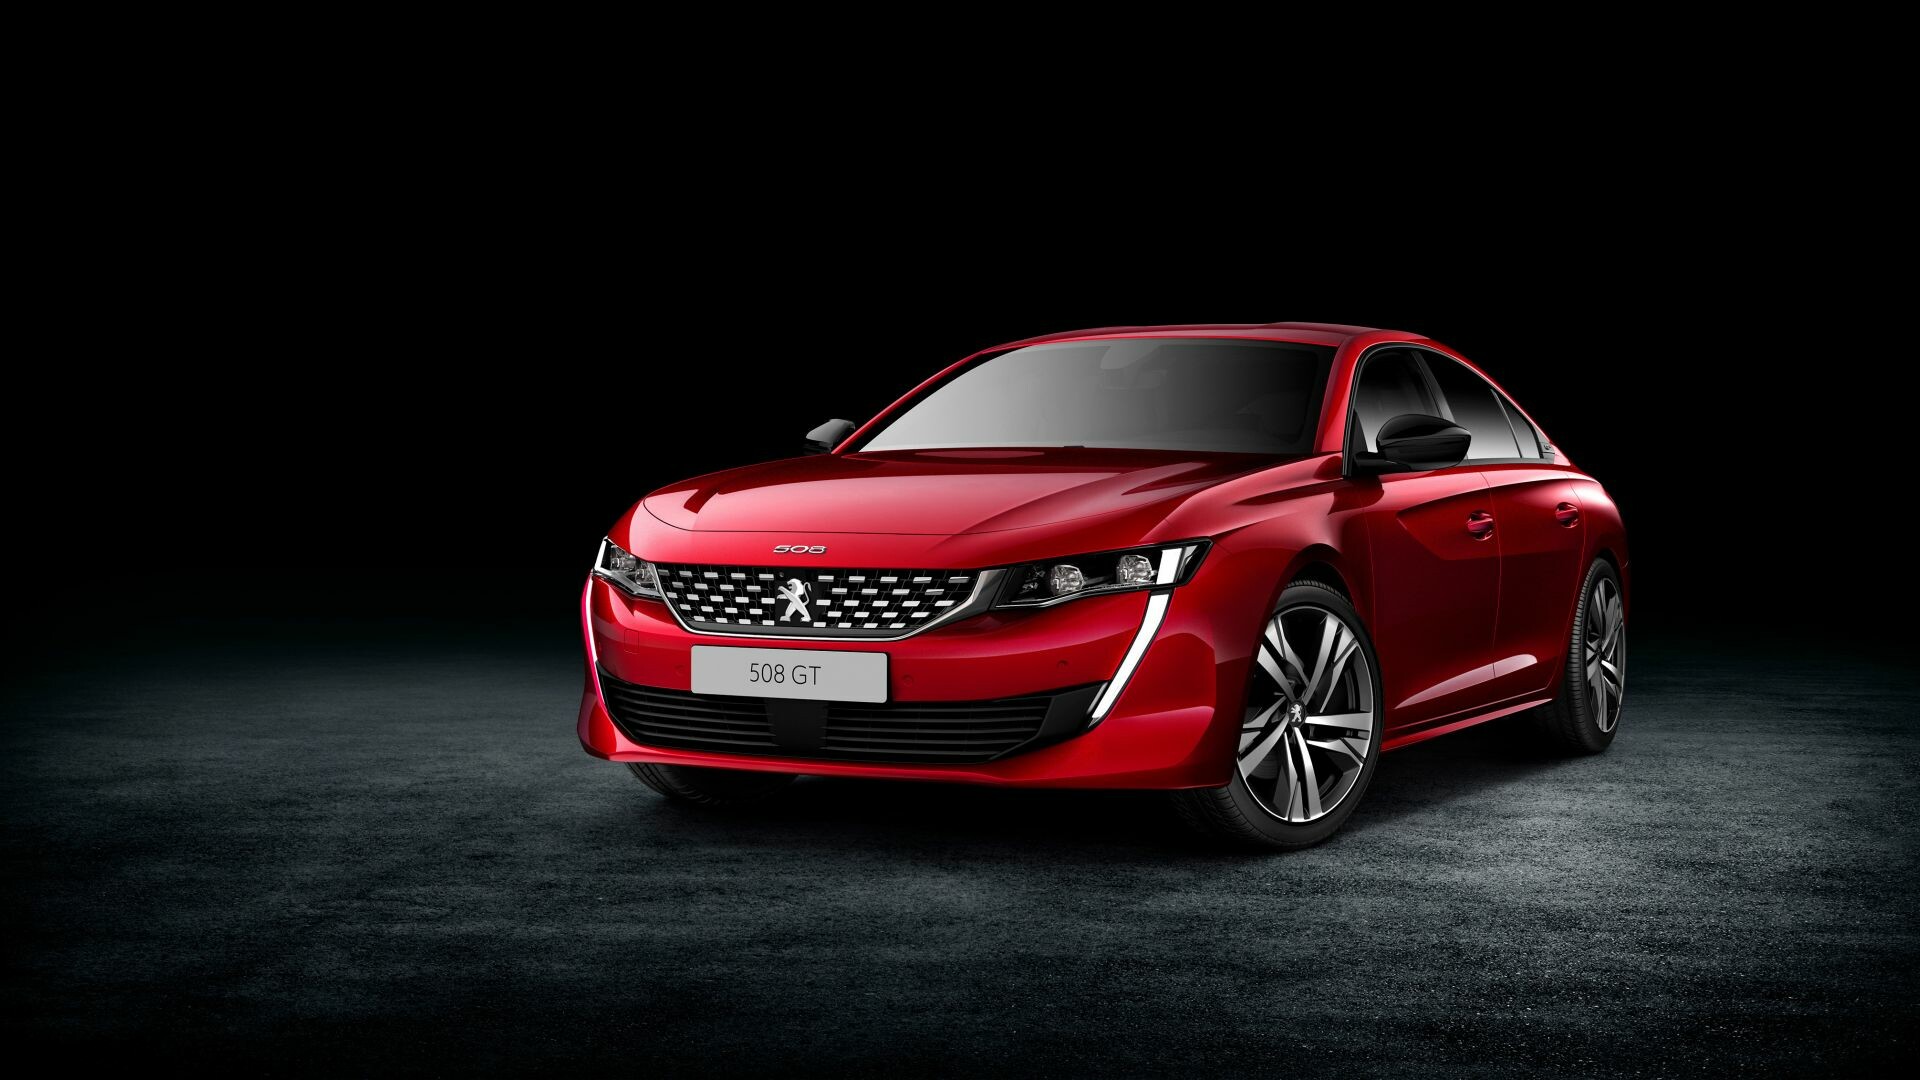 Peugeot: Model 508 GT, Presented a hybrid electric sports sedan at the 2008 Paris Motor Show called the RC HYmotion4. 1920x1080 Full HD Background.